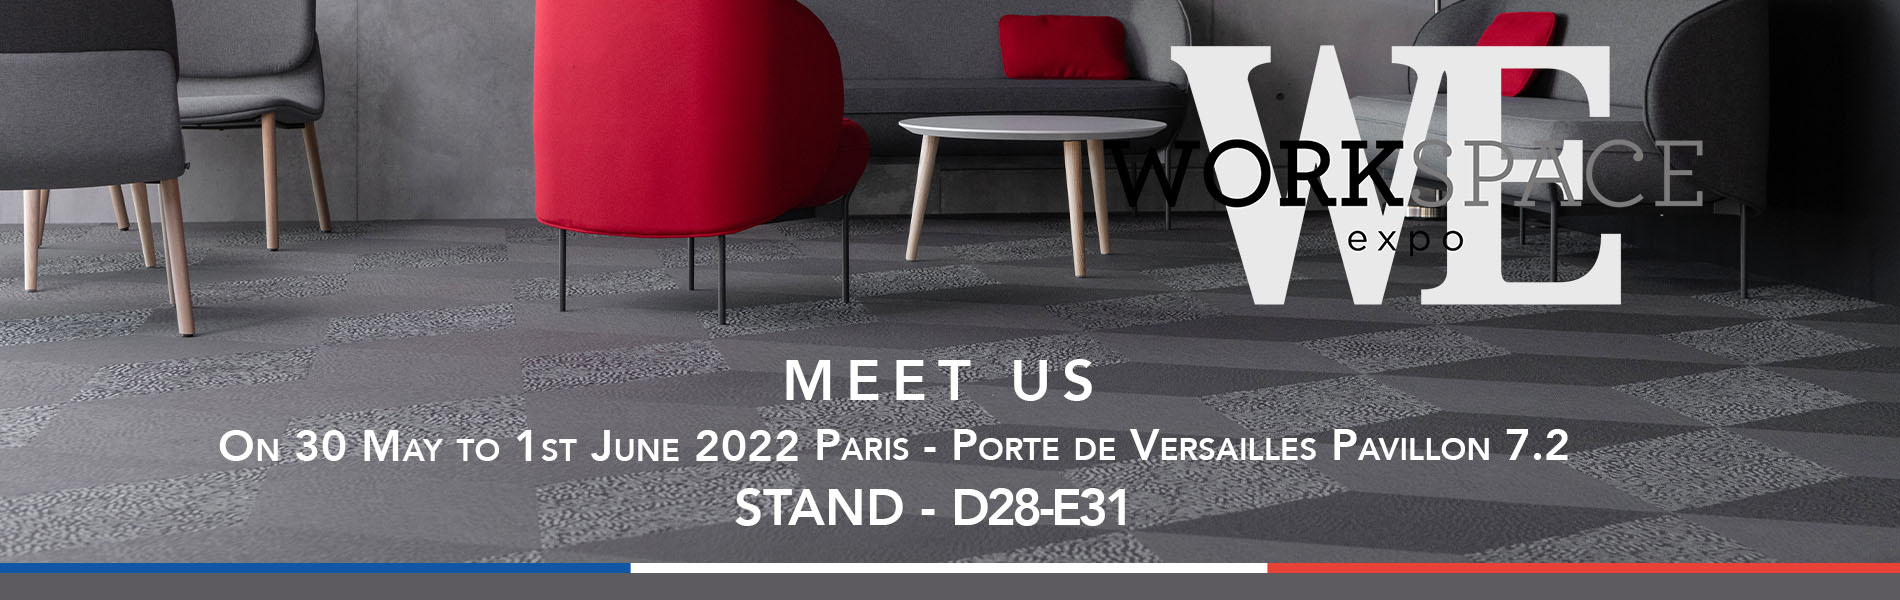 Dickson in Paris for Workspace Expo, from 30th May to 1st June 2022